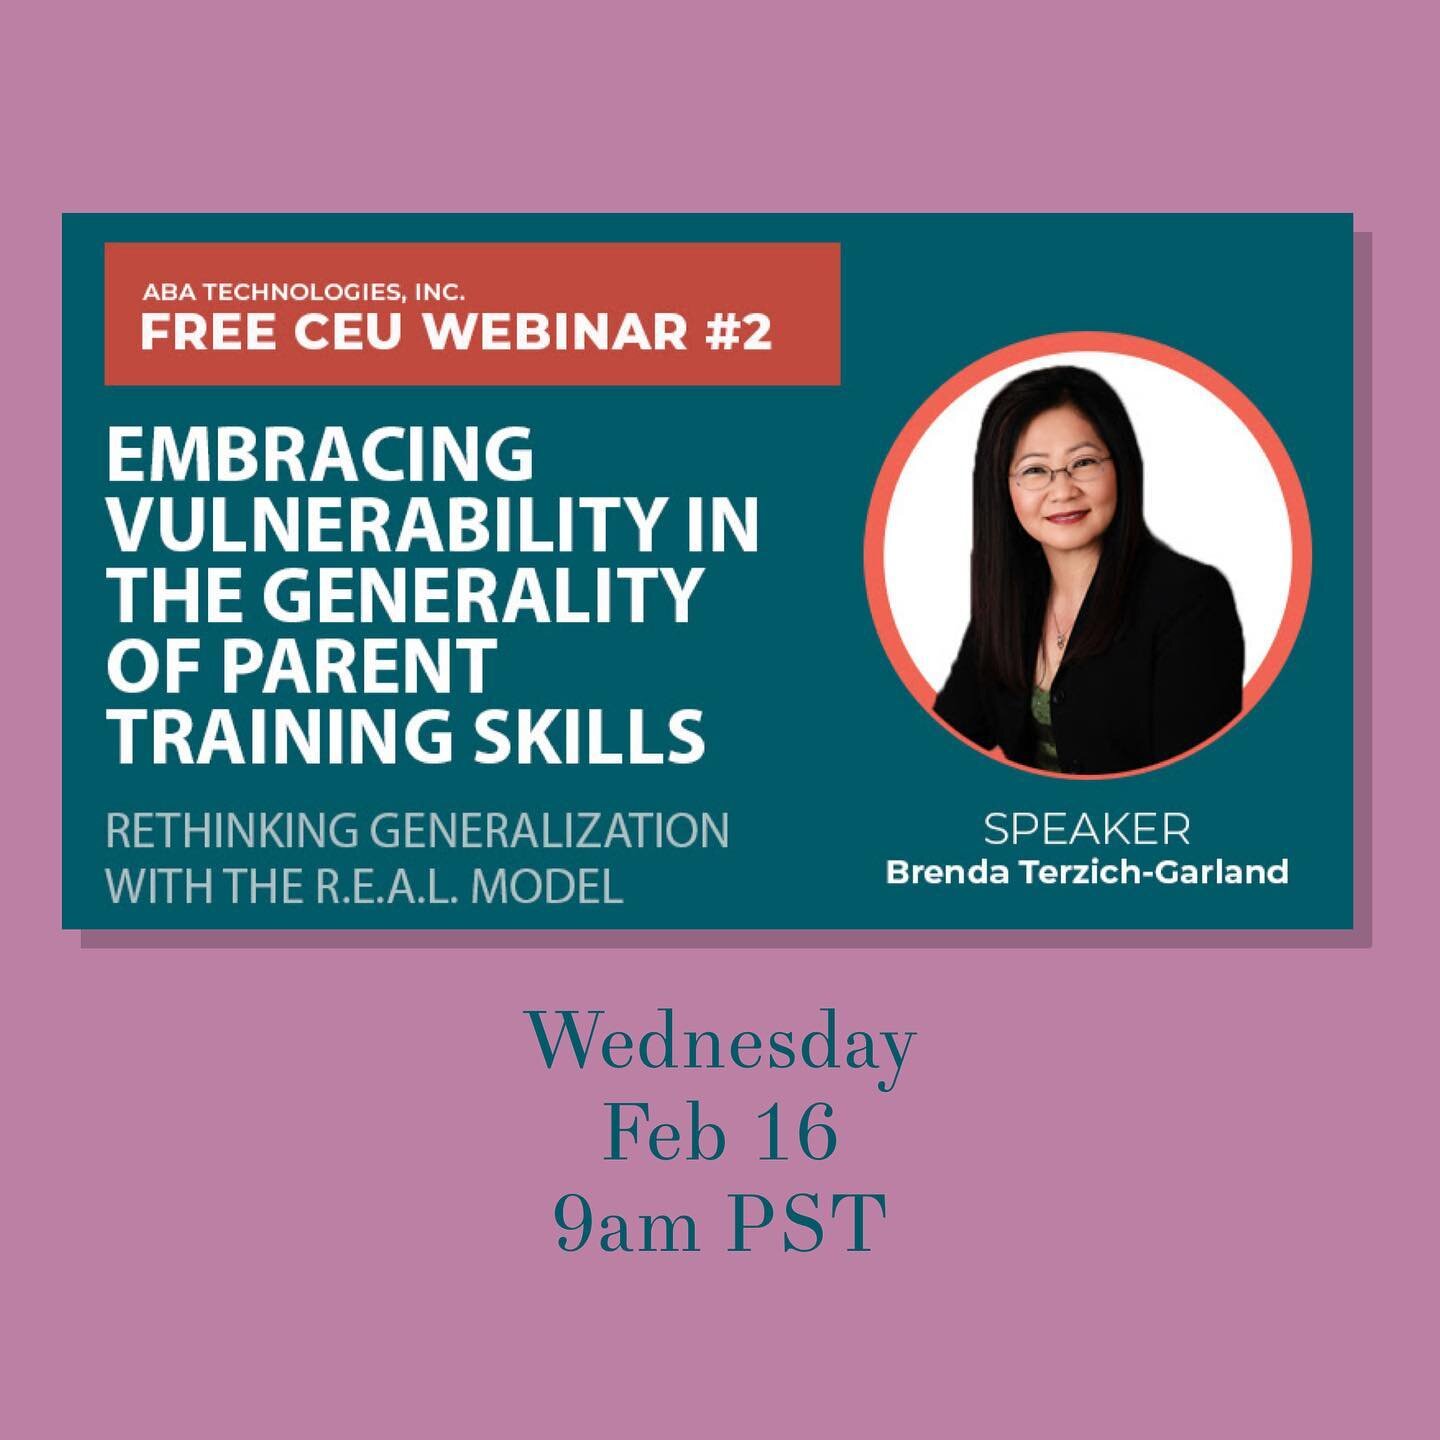 ✨FREE Webinar + 1 BACB Learning CEU ✨

This course focuses on bringing the private event of parent vulnerability into the public for behavior analysts to conduct a full analysis of the behaviors displayed by parents. 

All who attend will receive a r